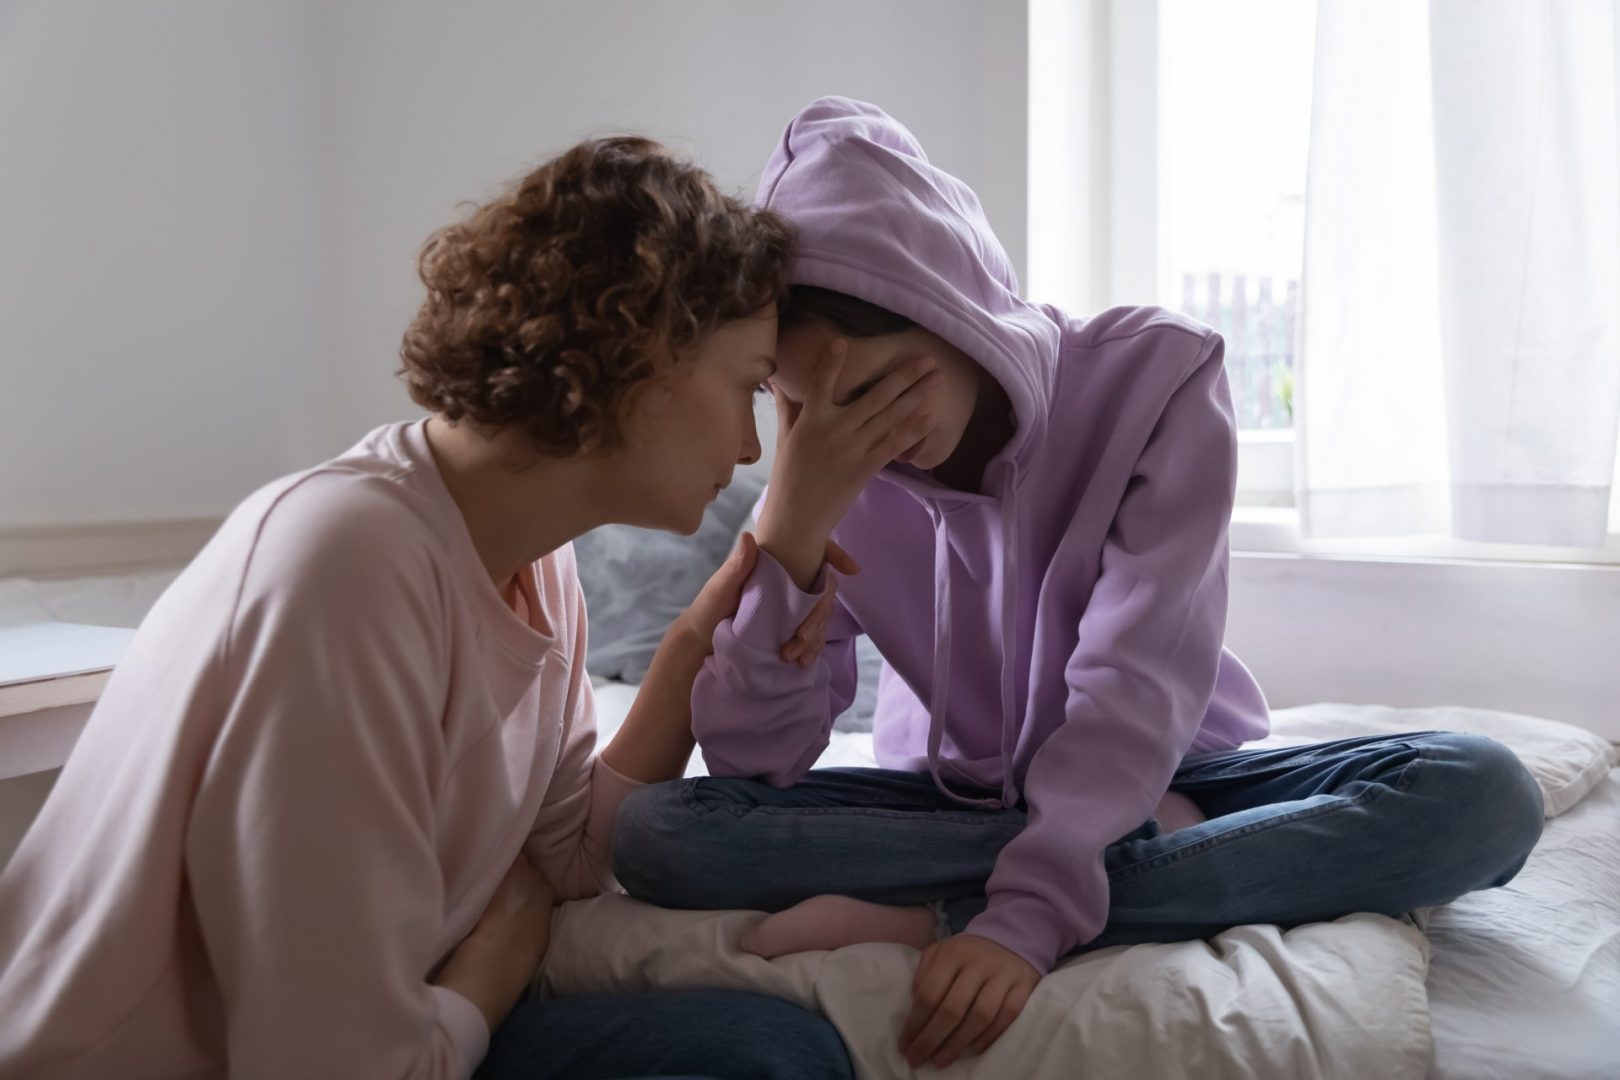 mother talking to sad teenager that needs mental health counseling